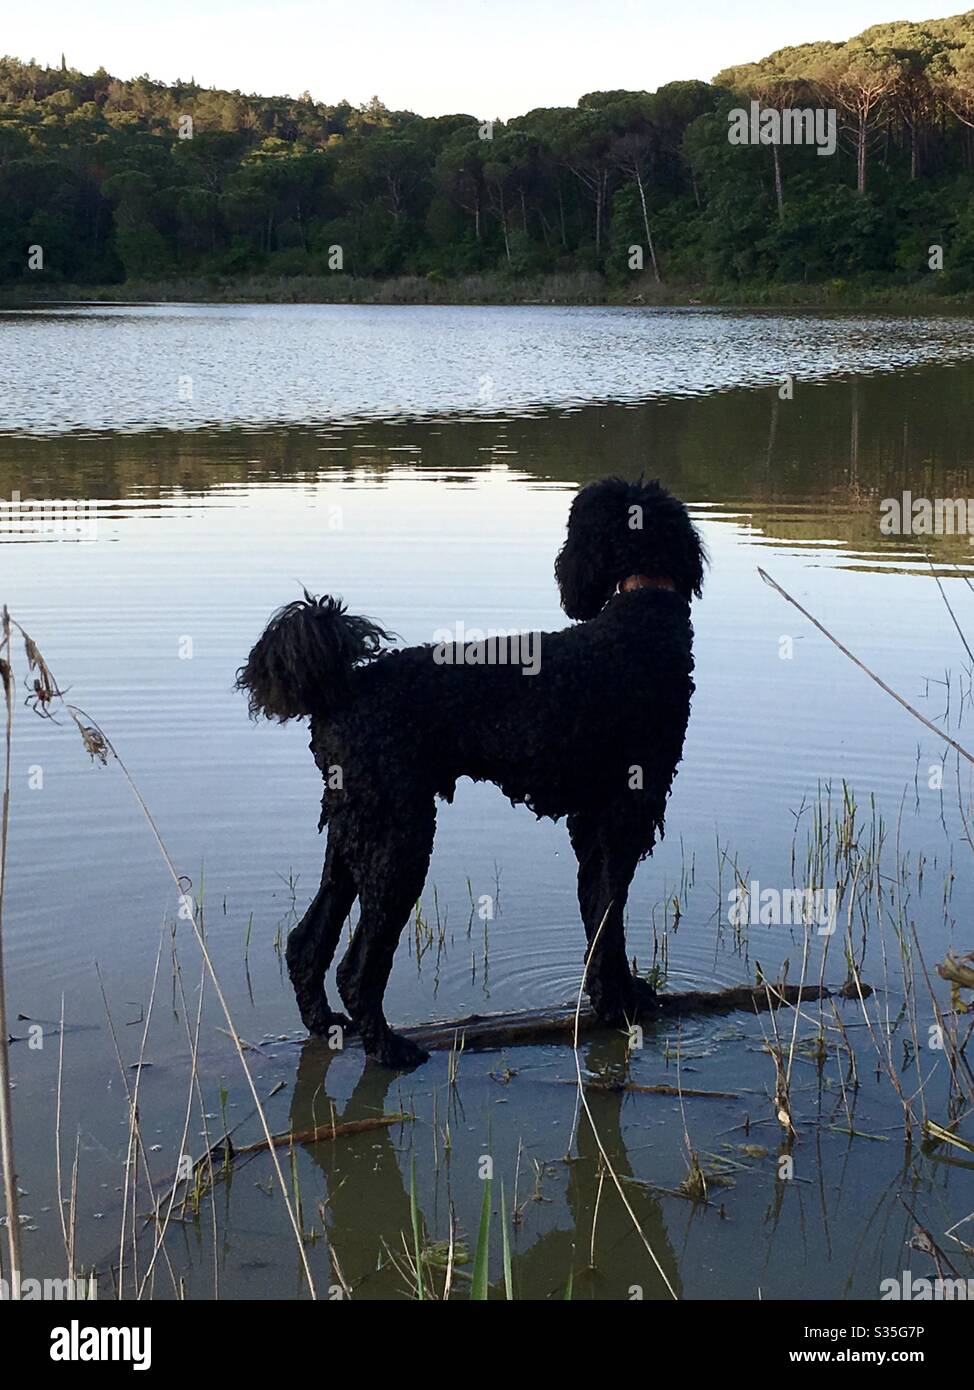 Standard poodle dog during a walk along a lake Stock Photo